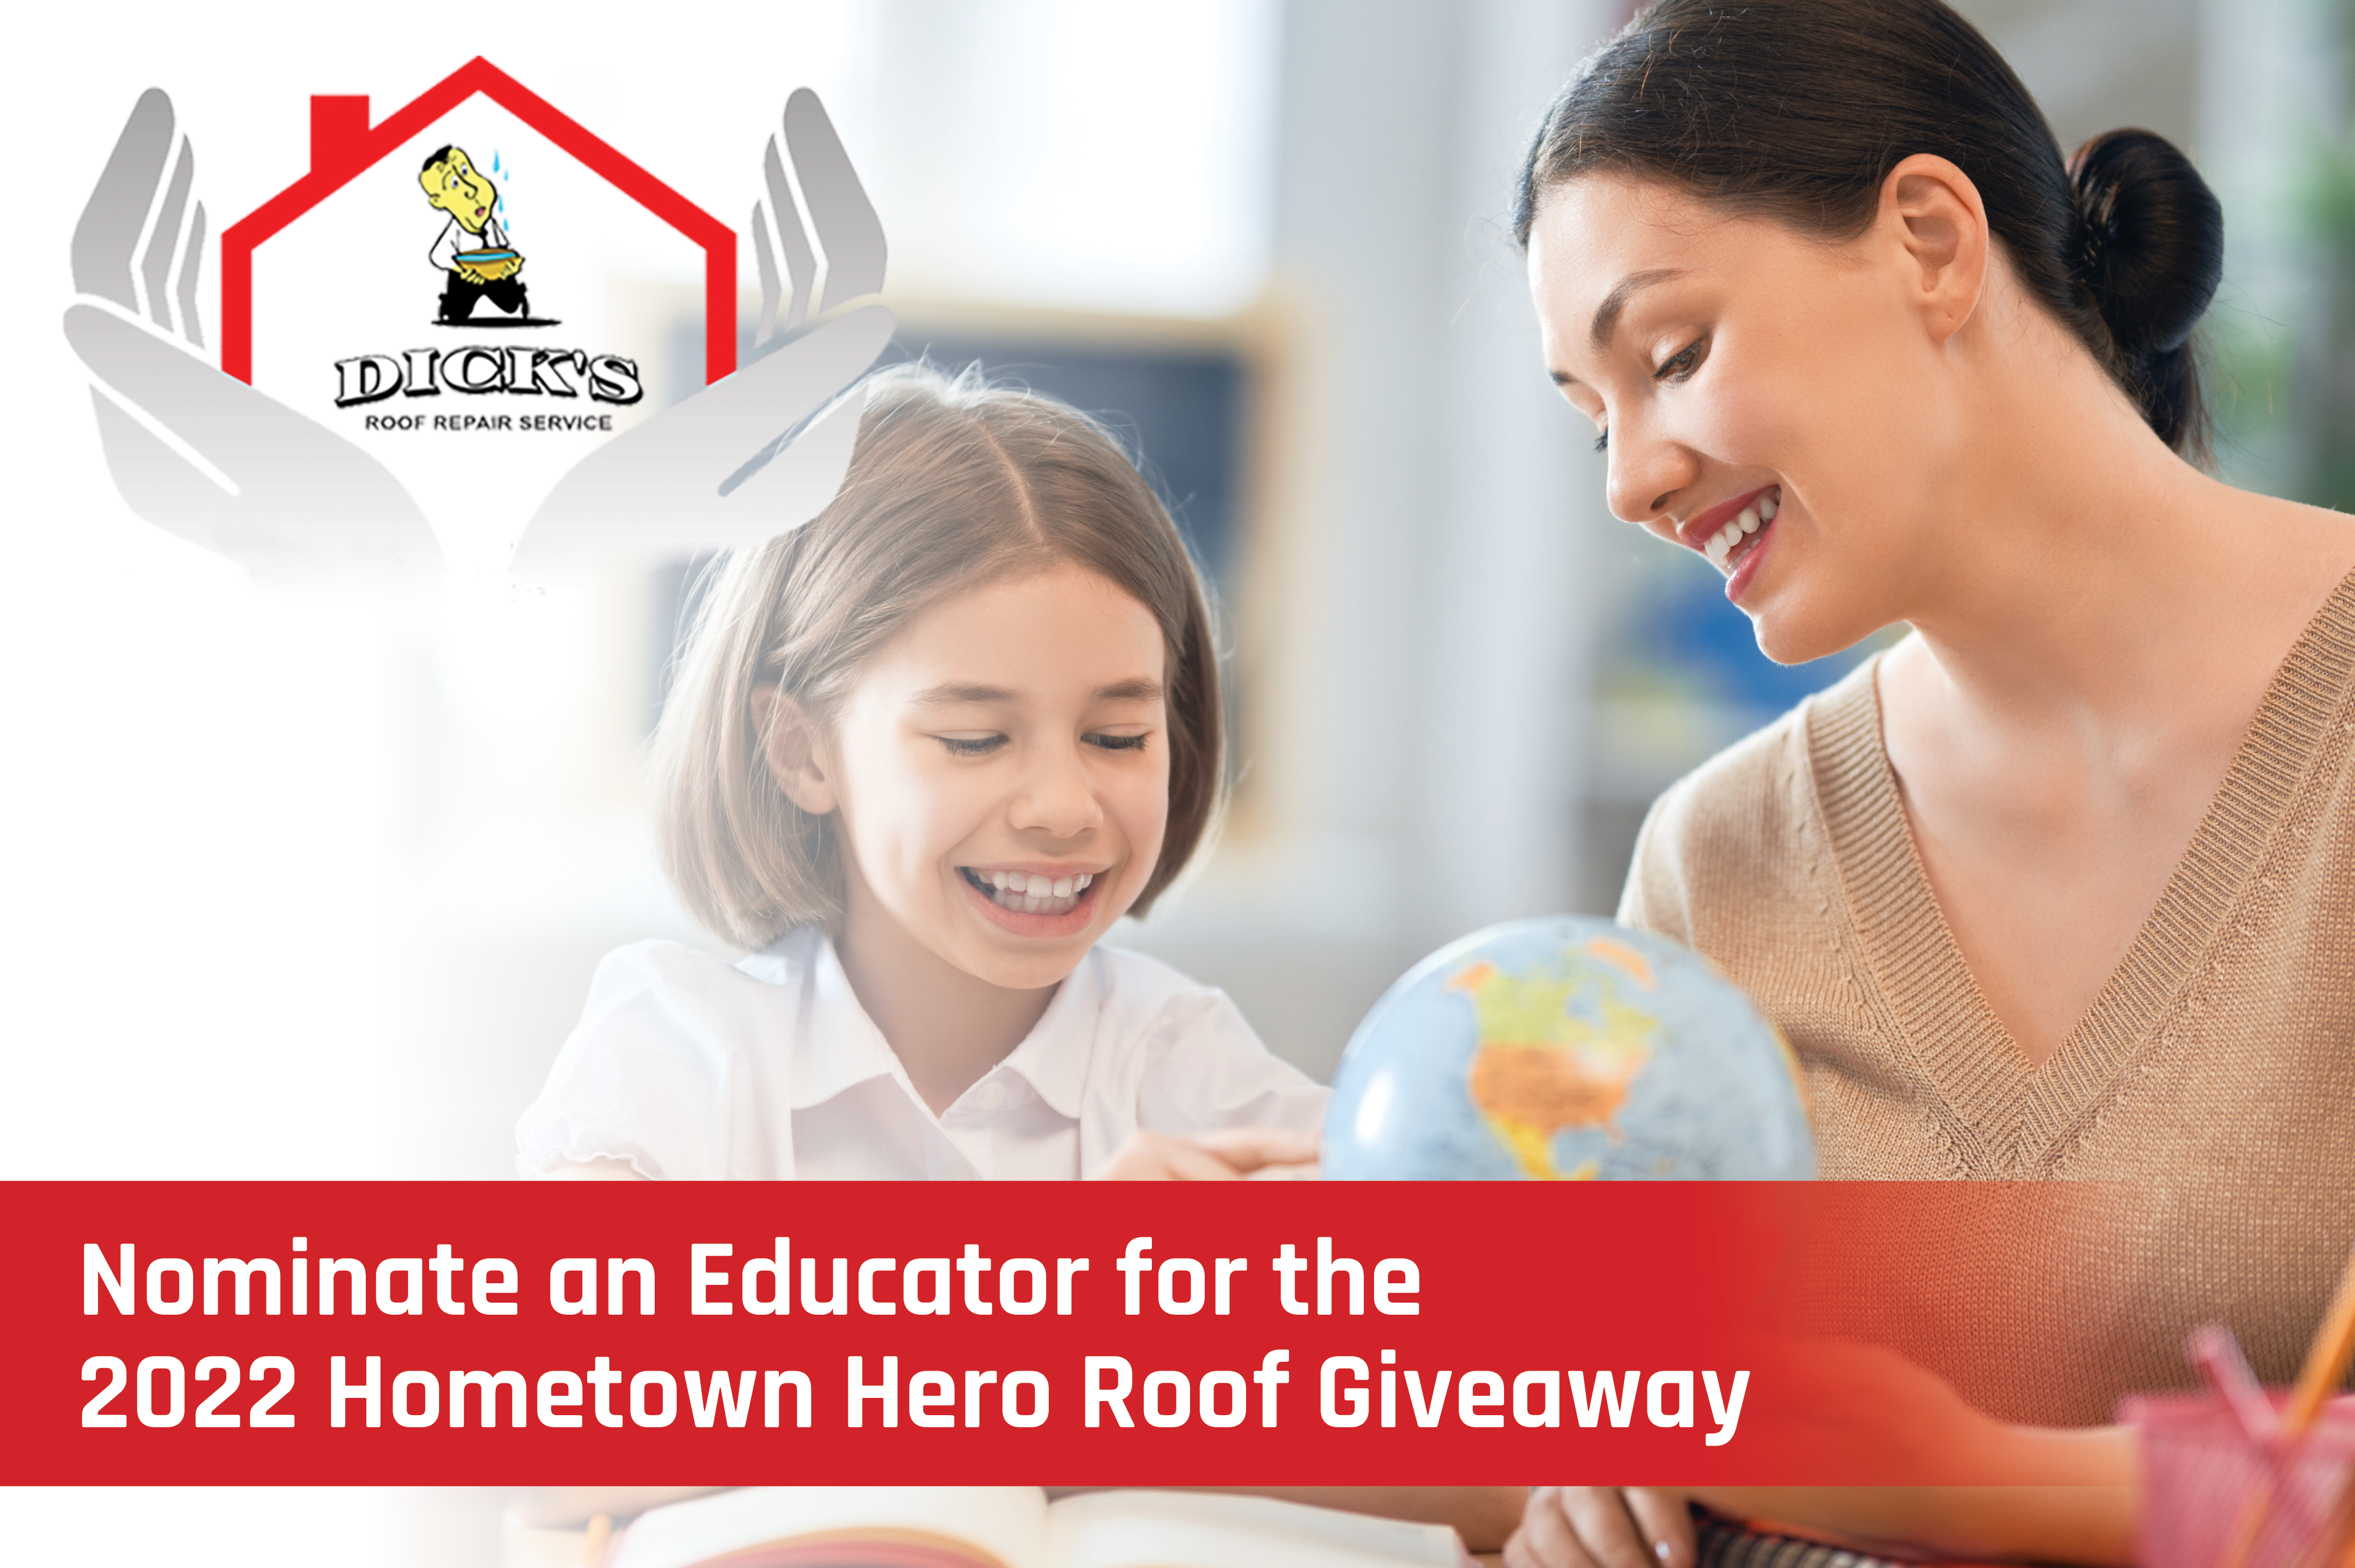 Nominate an Educator for a FREE Roof